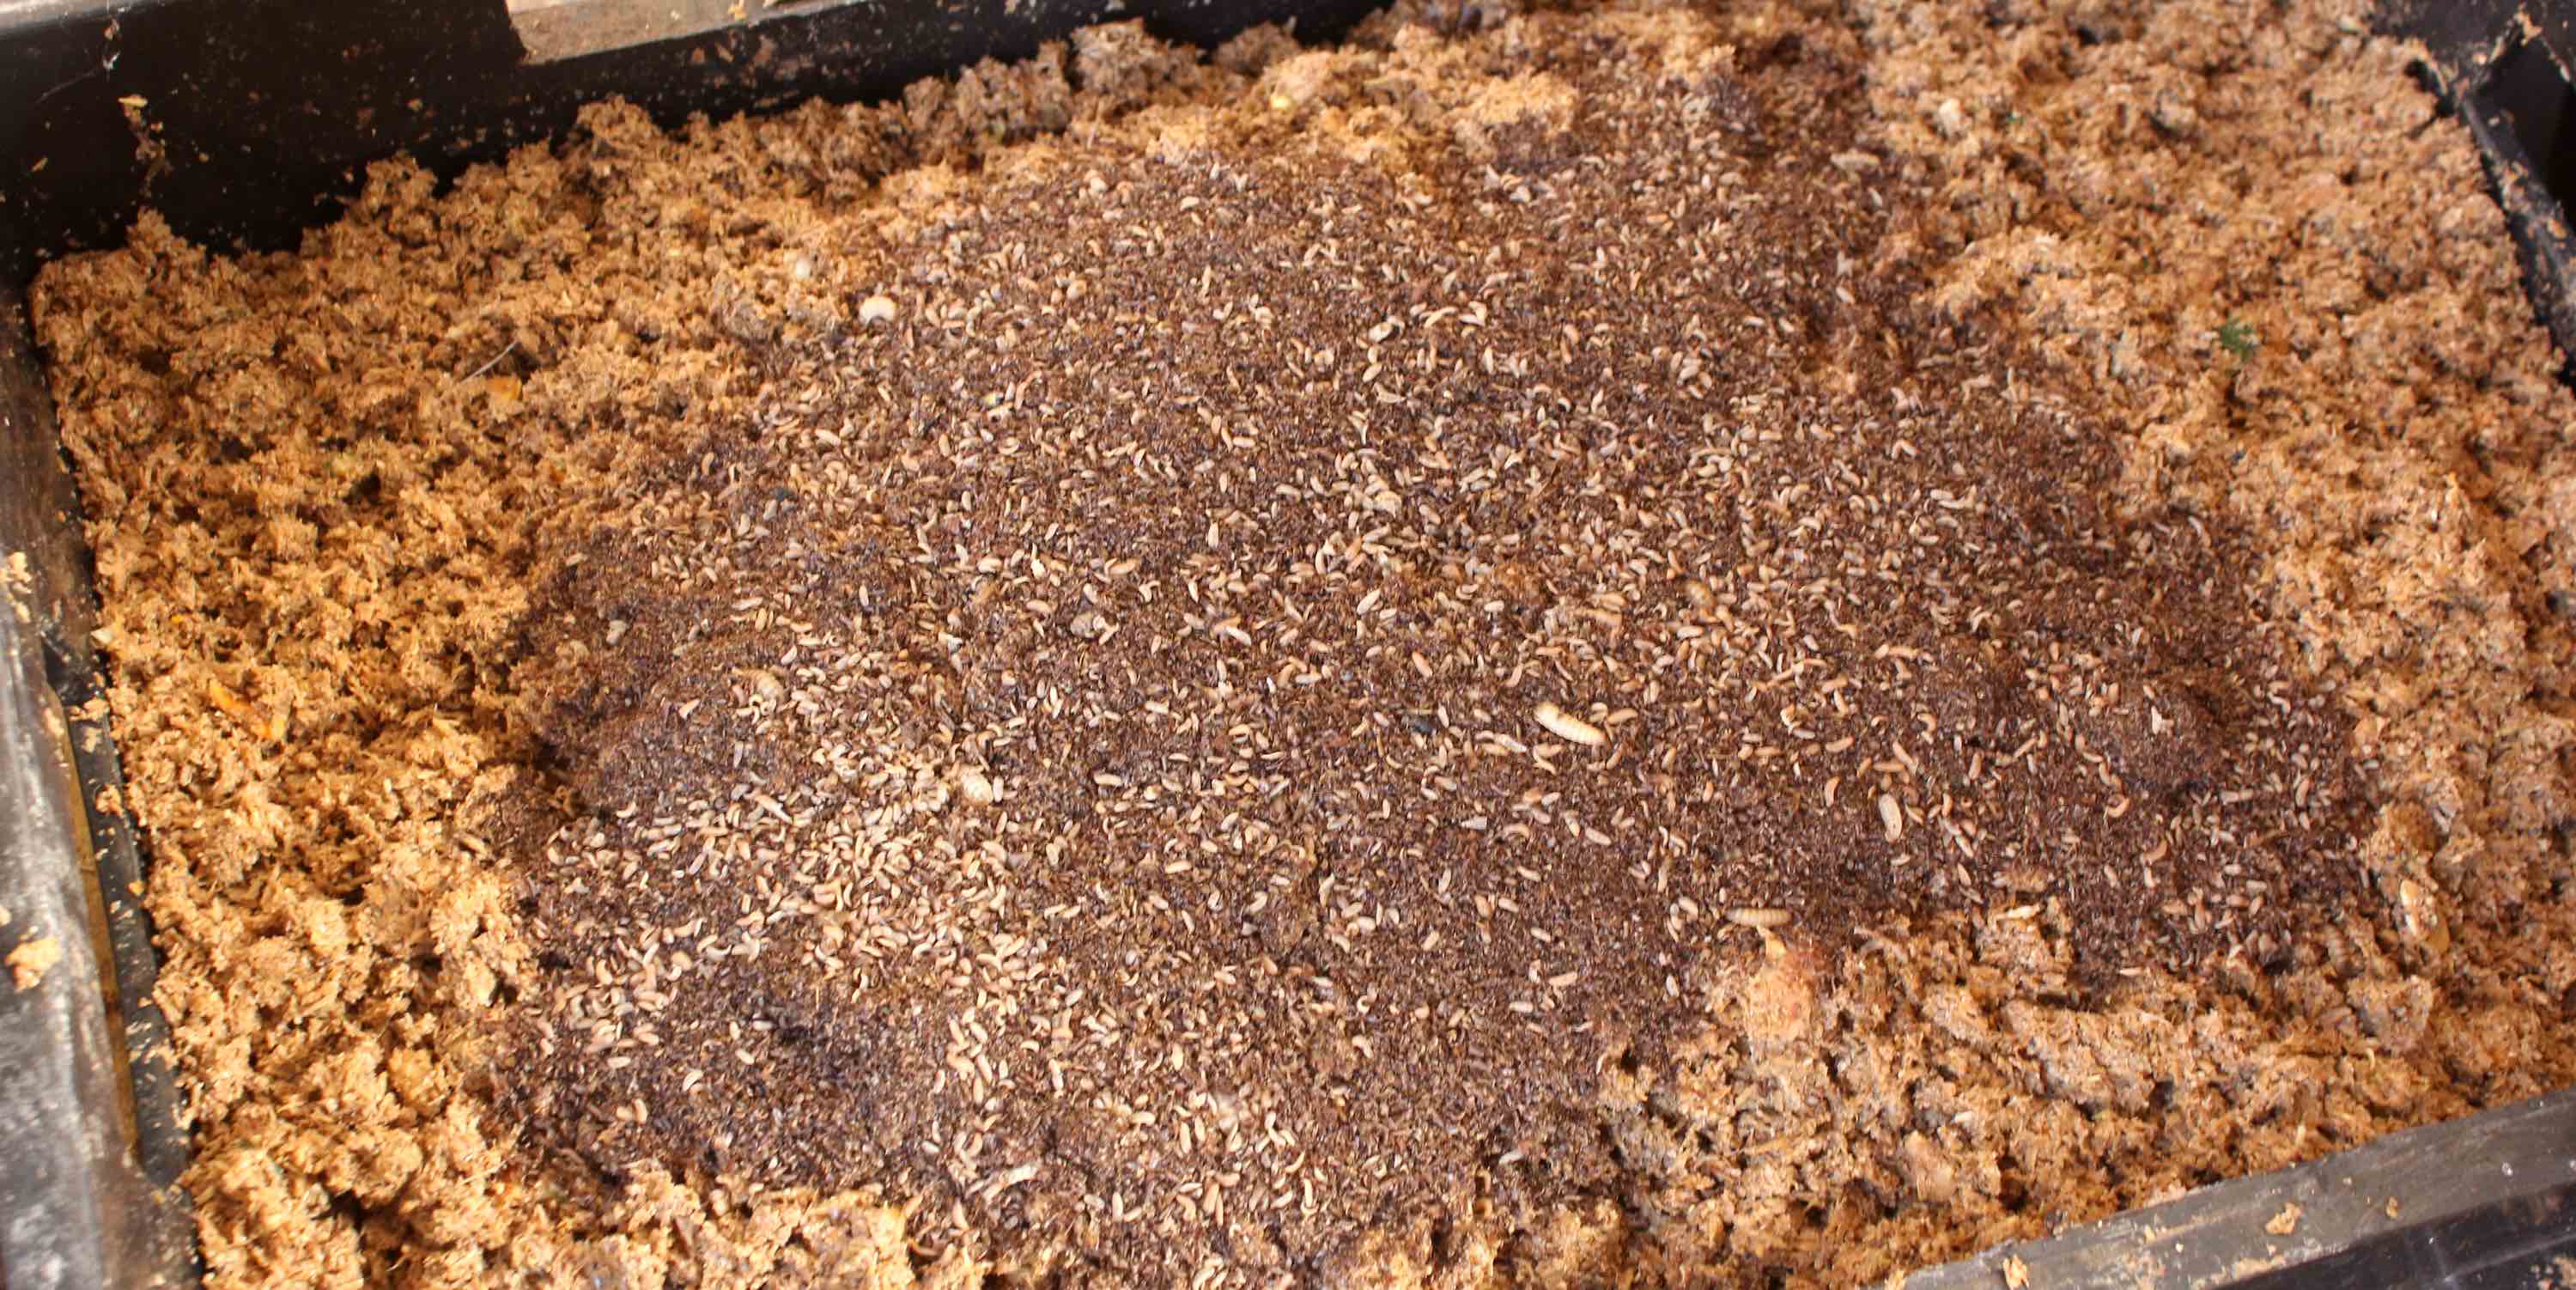 A mass of tiny white larvae resting on (and eating) brown grain and wheat bran.